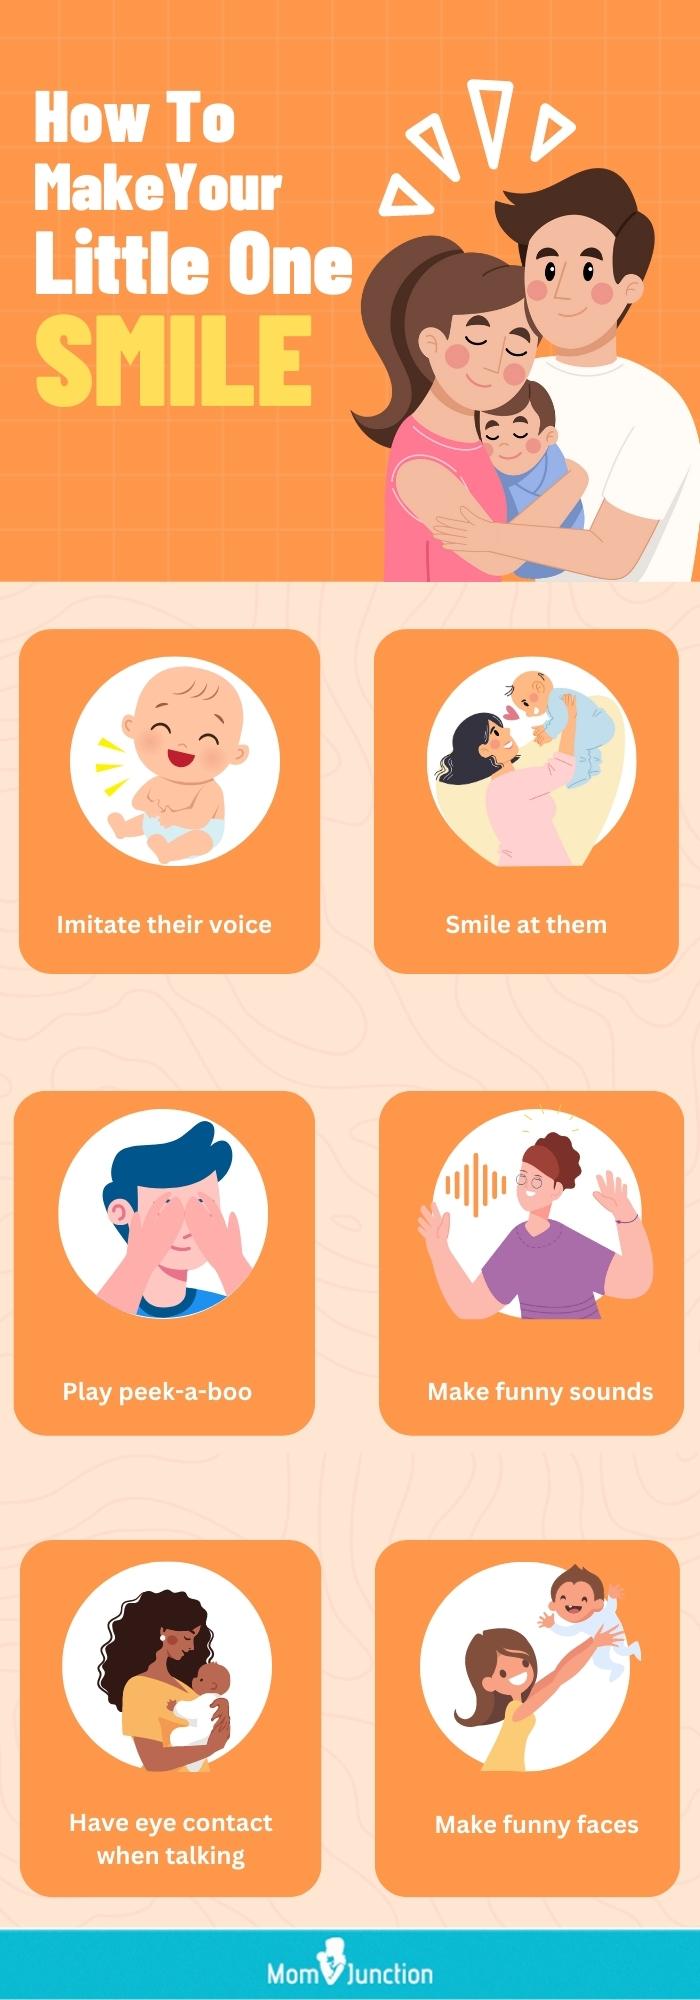 how to make your little one smile(infographic)